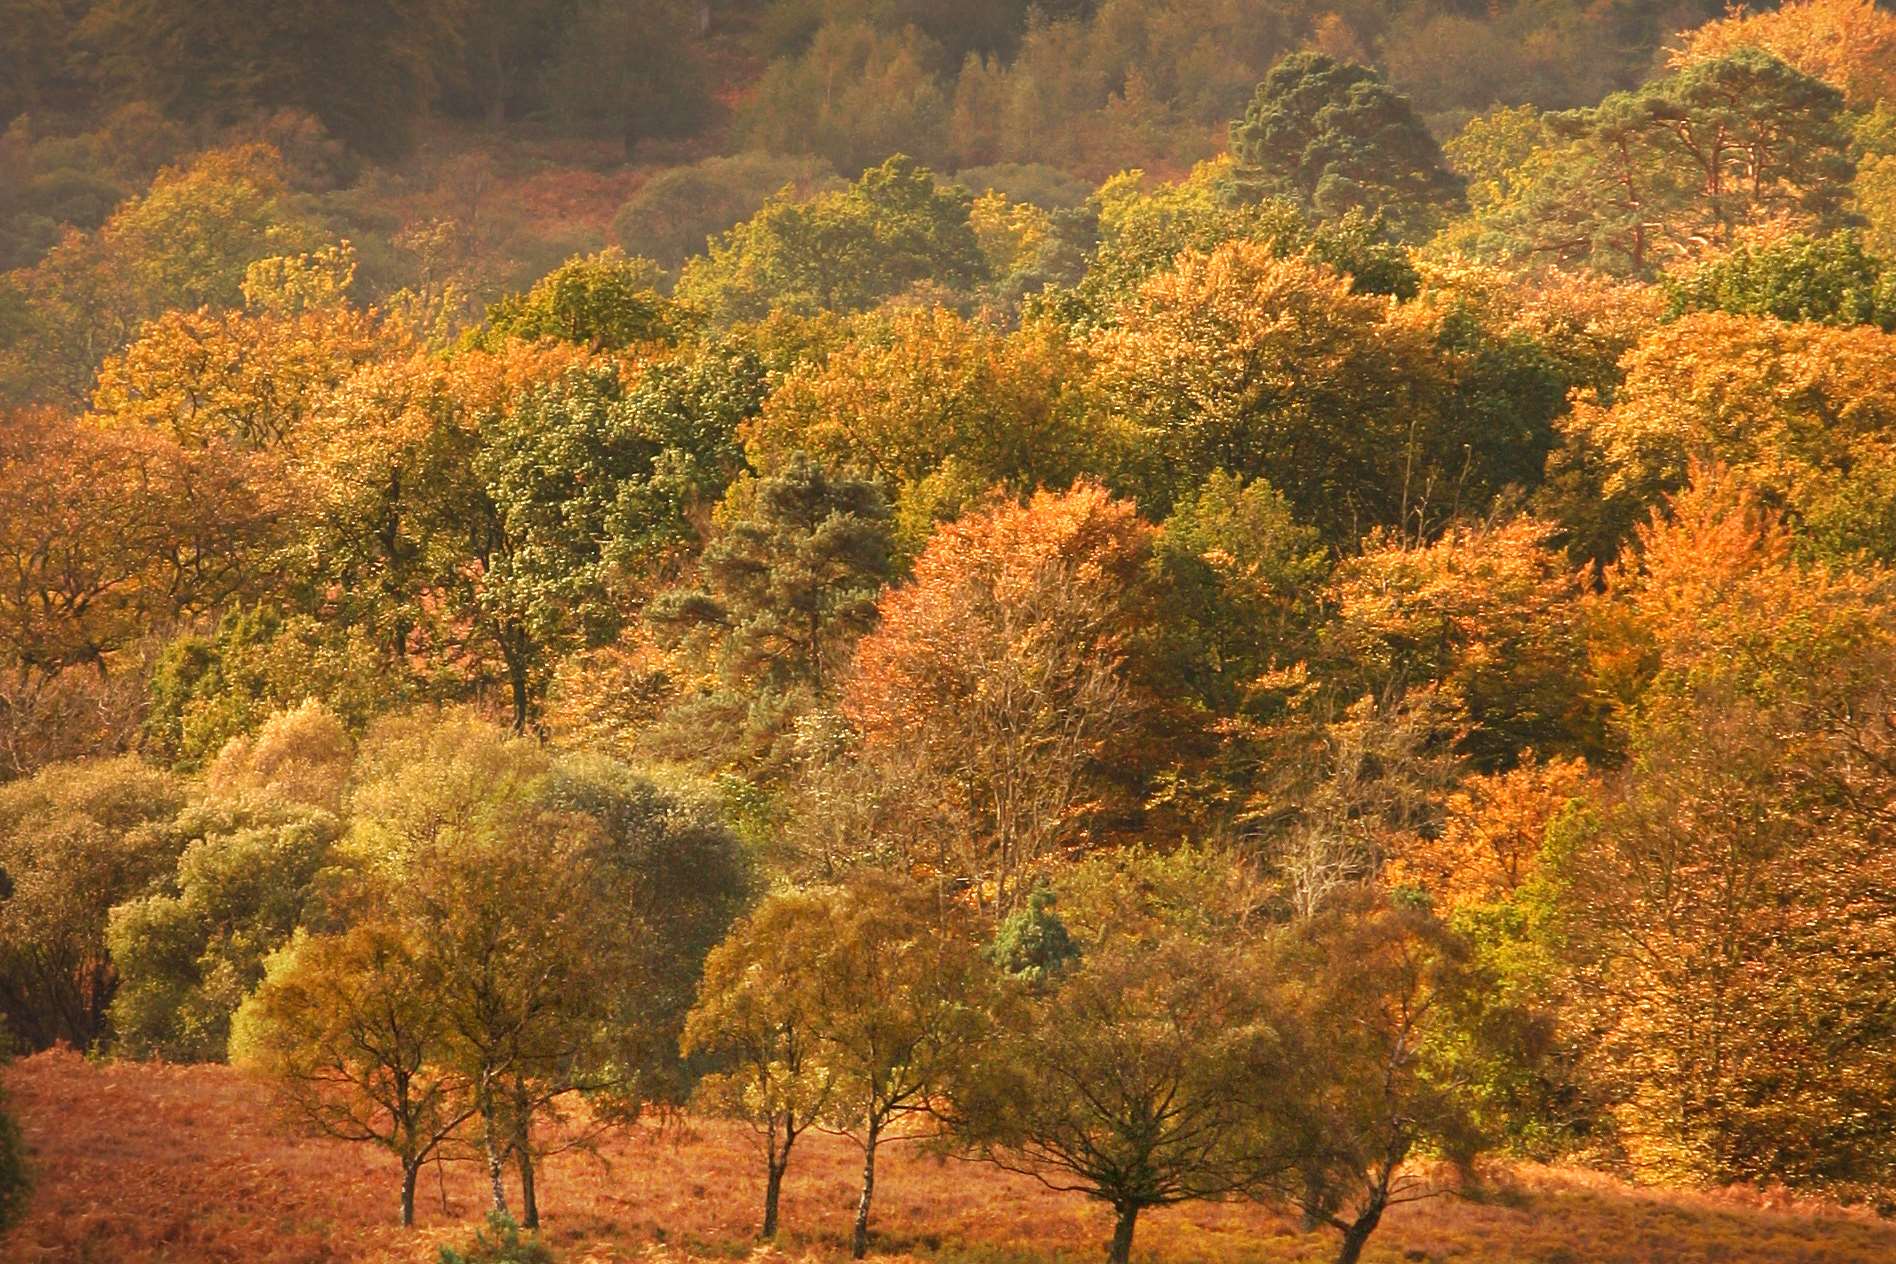 The New Forest.